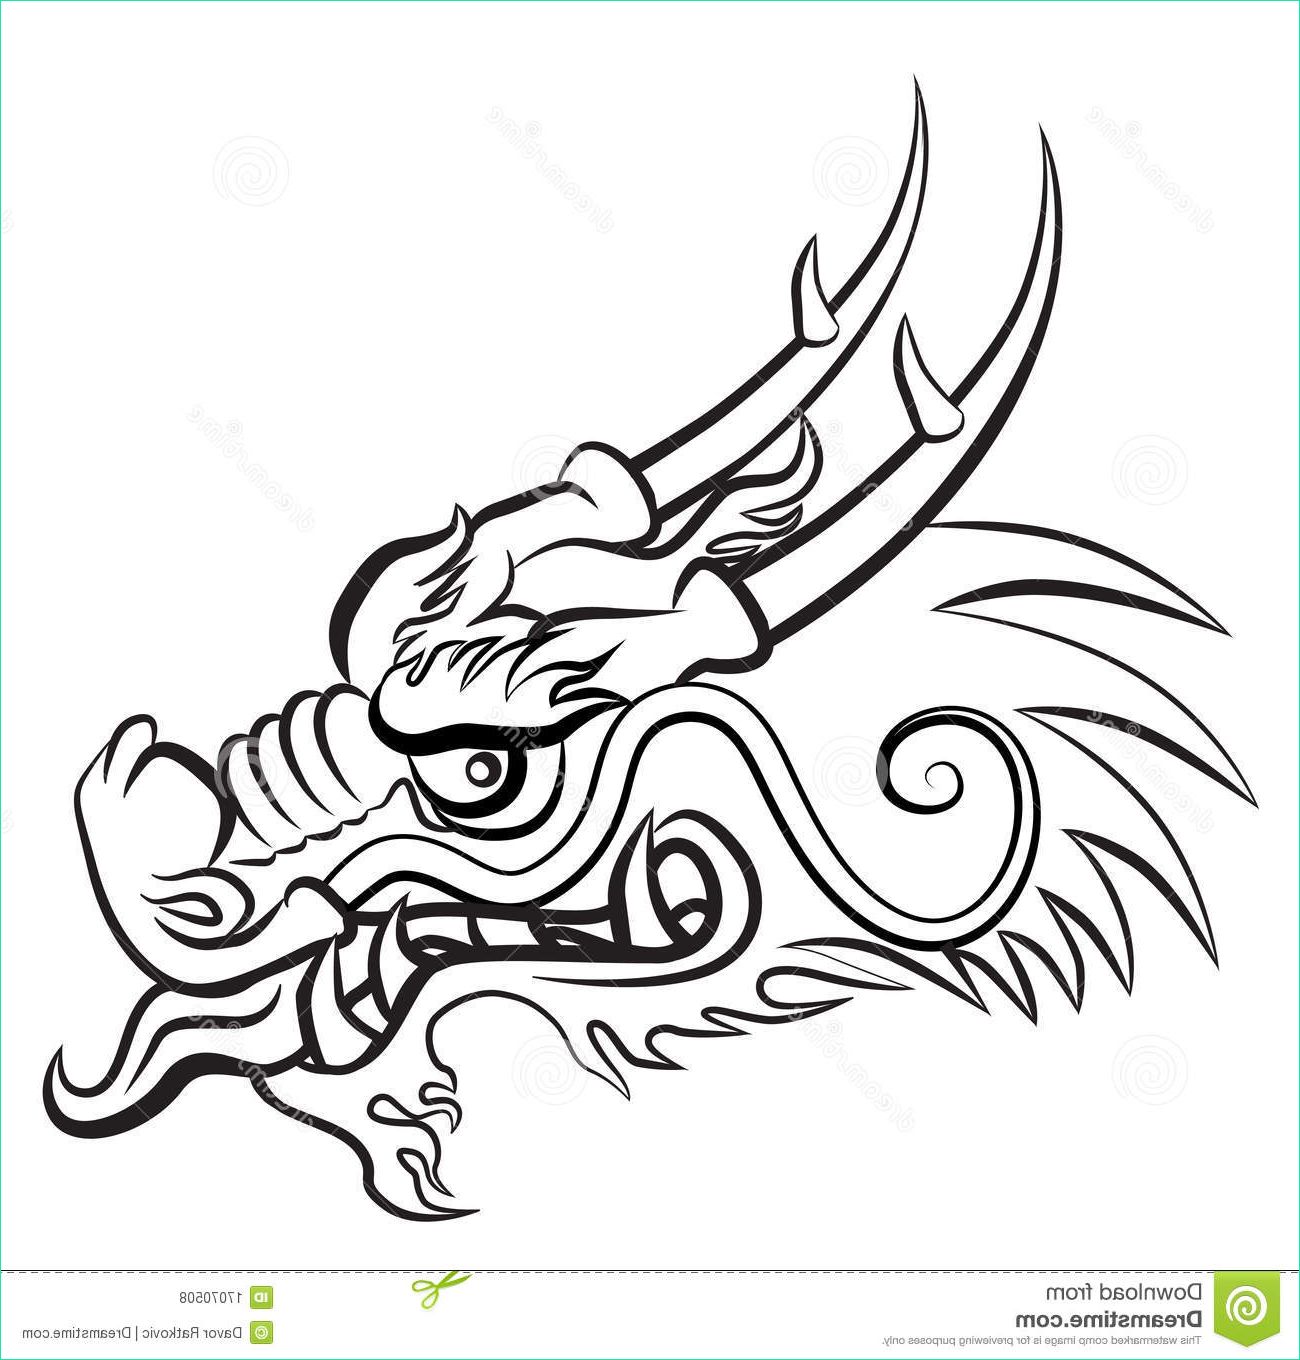 Dragon Chinois Dessin Simple Beau Images Dessin Facile Dragon Chinois Dessin Facile